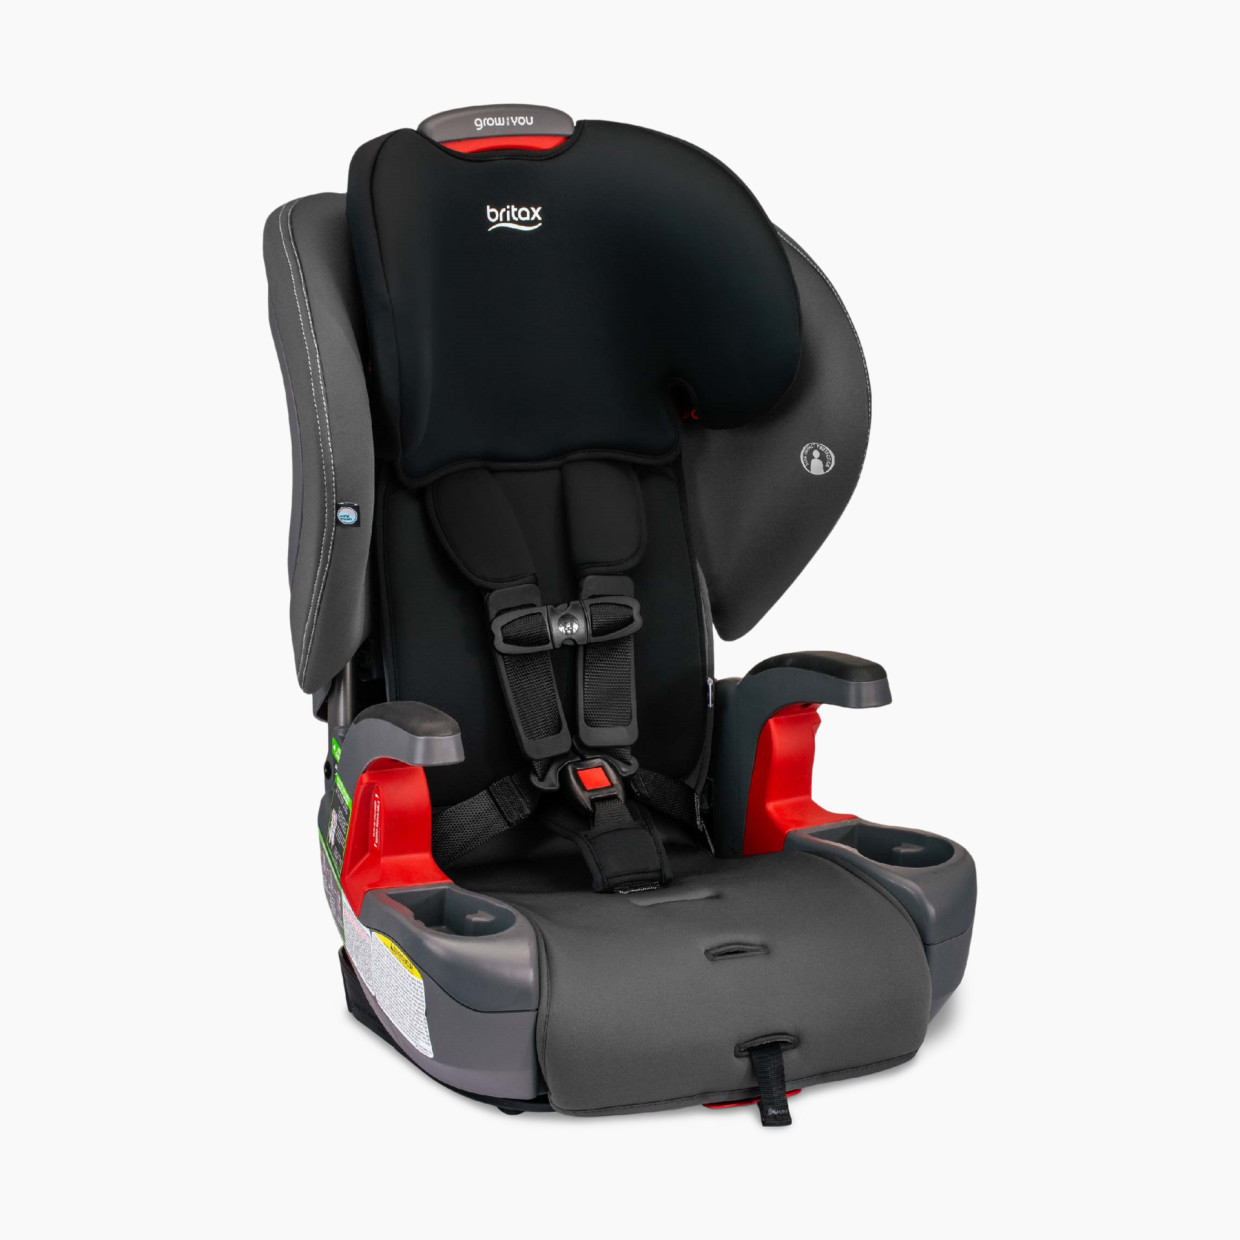 Britax Grow With You Harness-2-Booster - Mod Black.